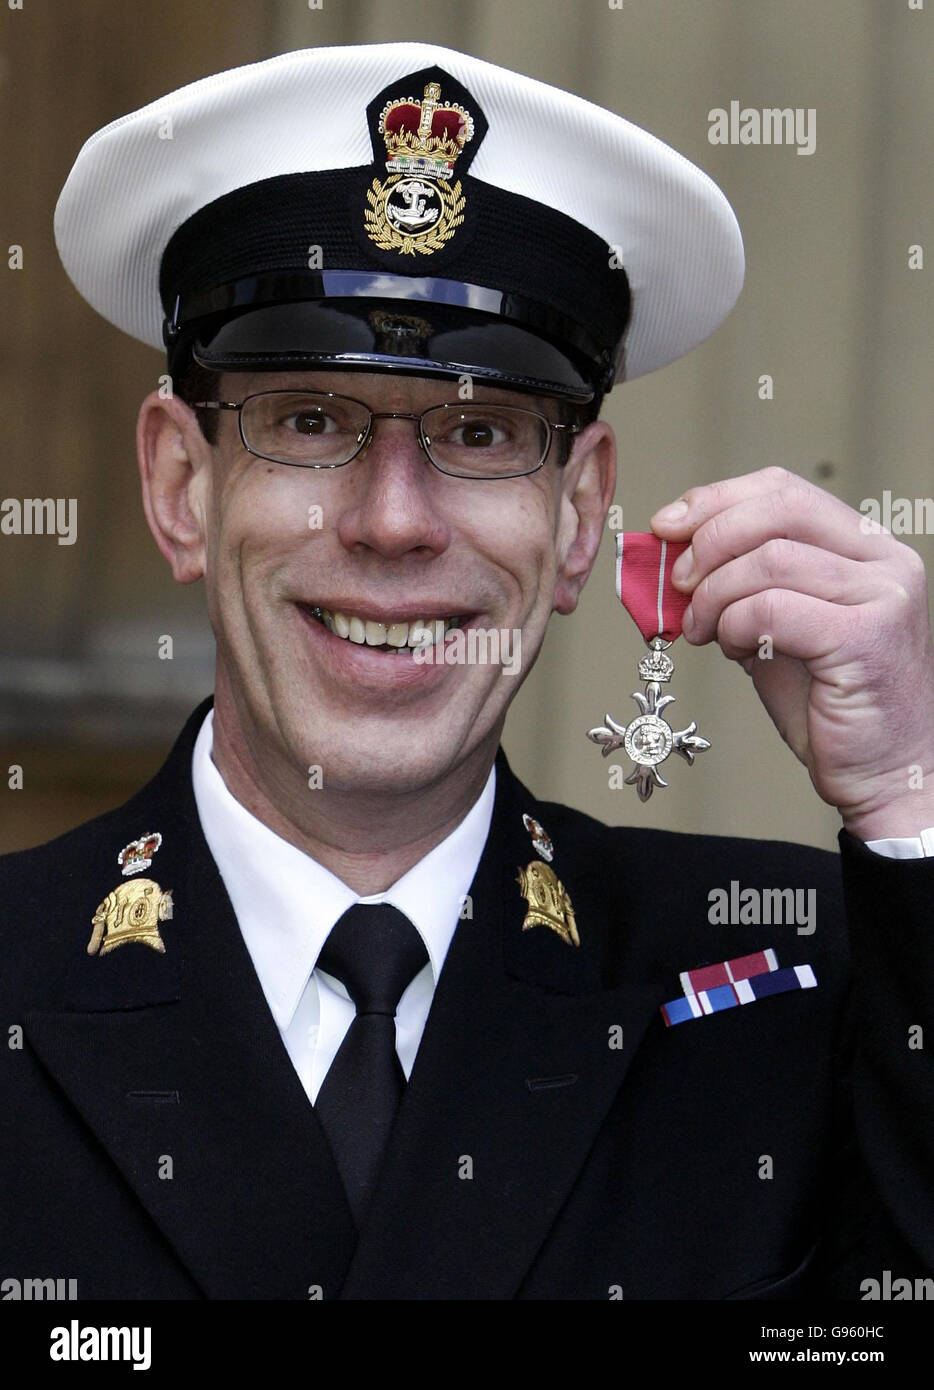 Royal Navy Chief Petty Officer Andrew Moss with his MBE after receiving it from Britain's Queen Elizabeth II at Buckingham Palace, London, Thursday March 2, 2006. See PA story ROYAL Investiture. PRESS ASSOCIATION Photo. Photo credit should read: Andrew Parsons/WPA rota/PA. Stock Photo